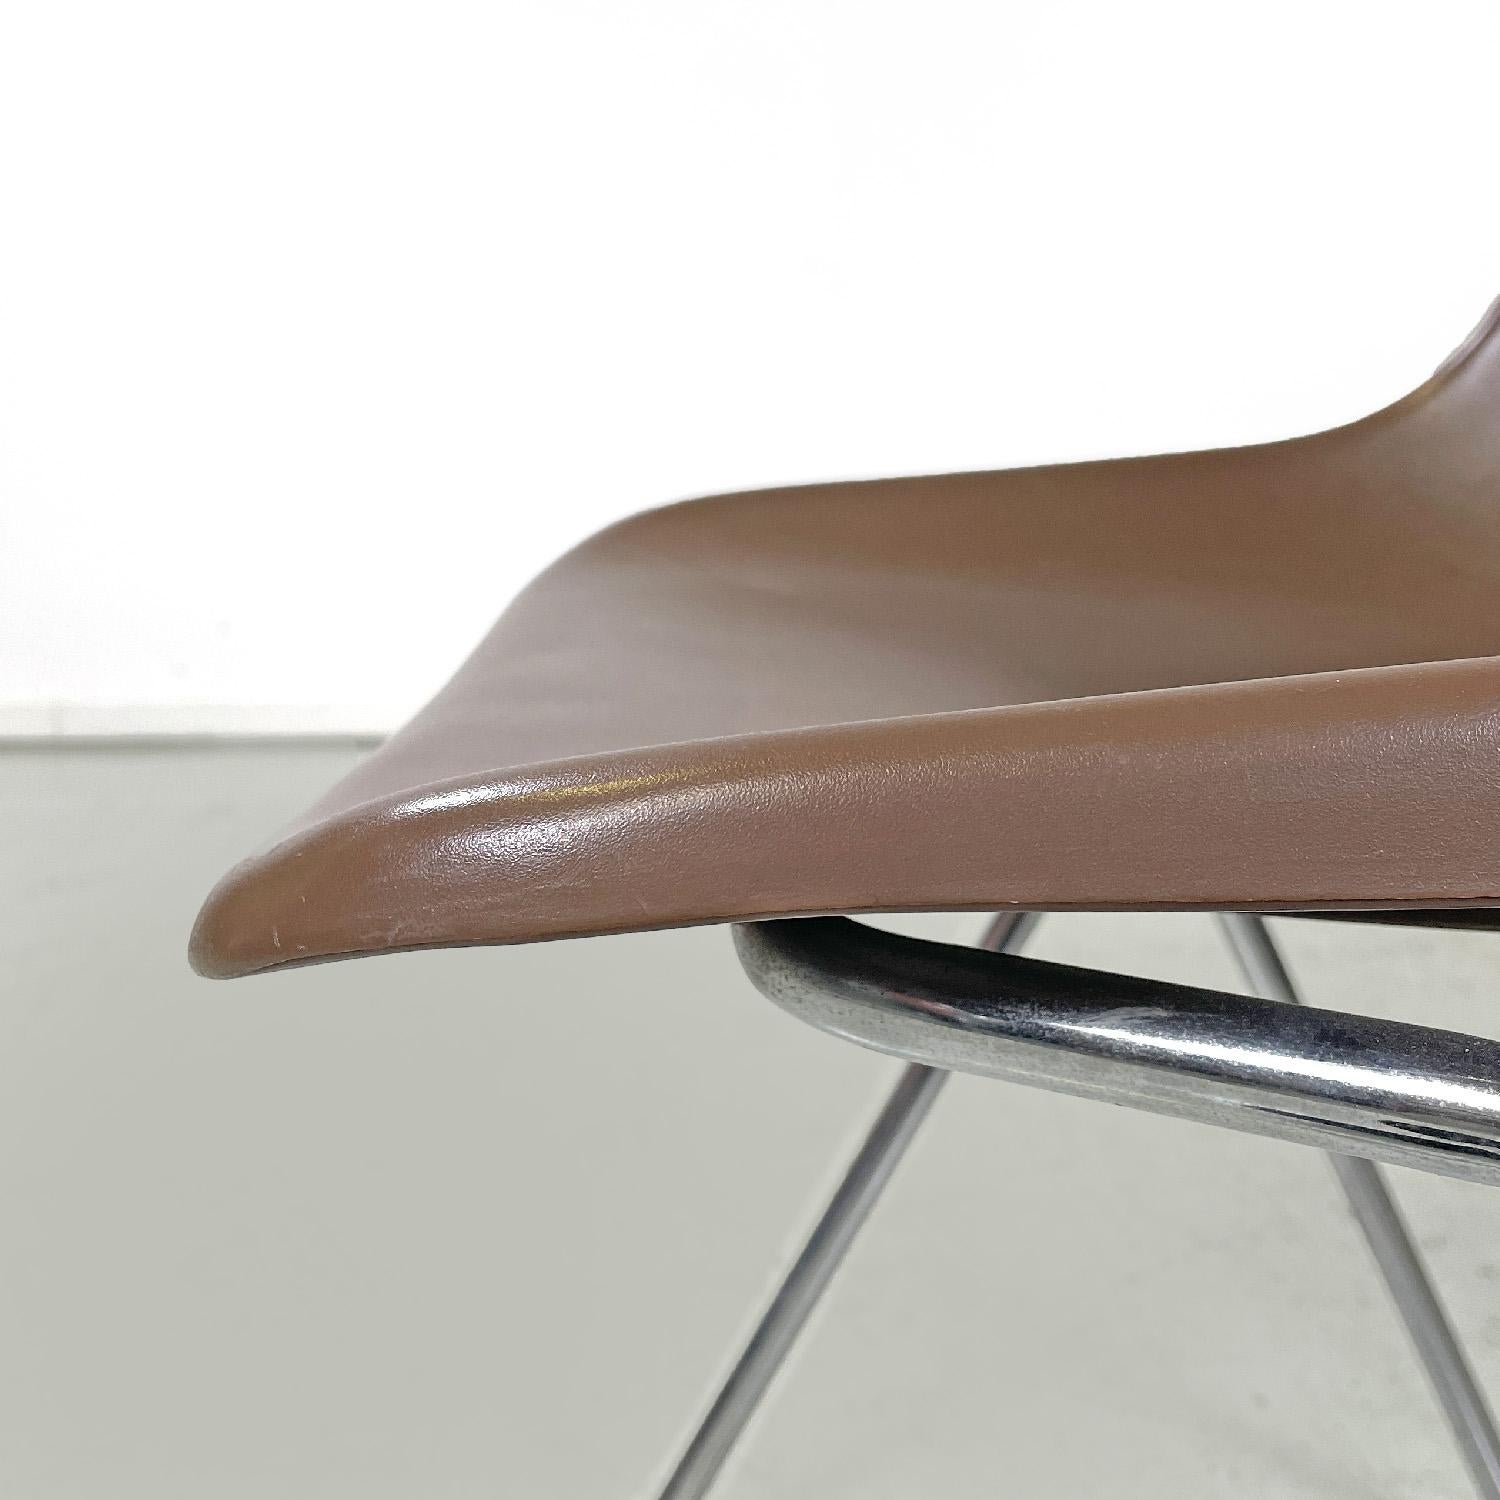 Italian modern stackable chairs by Proinco in brown plastic, 1970s For Sale 2